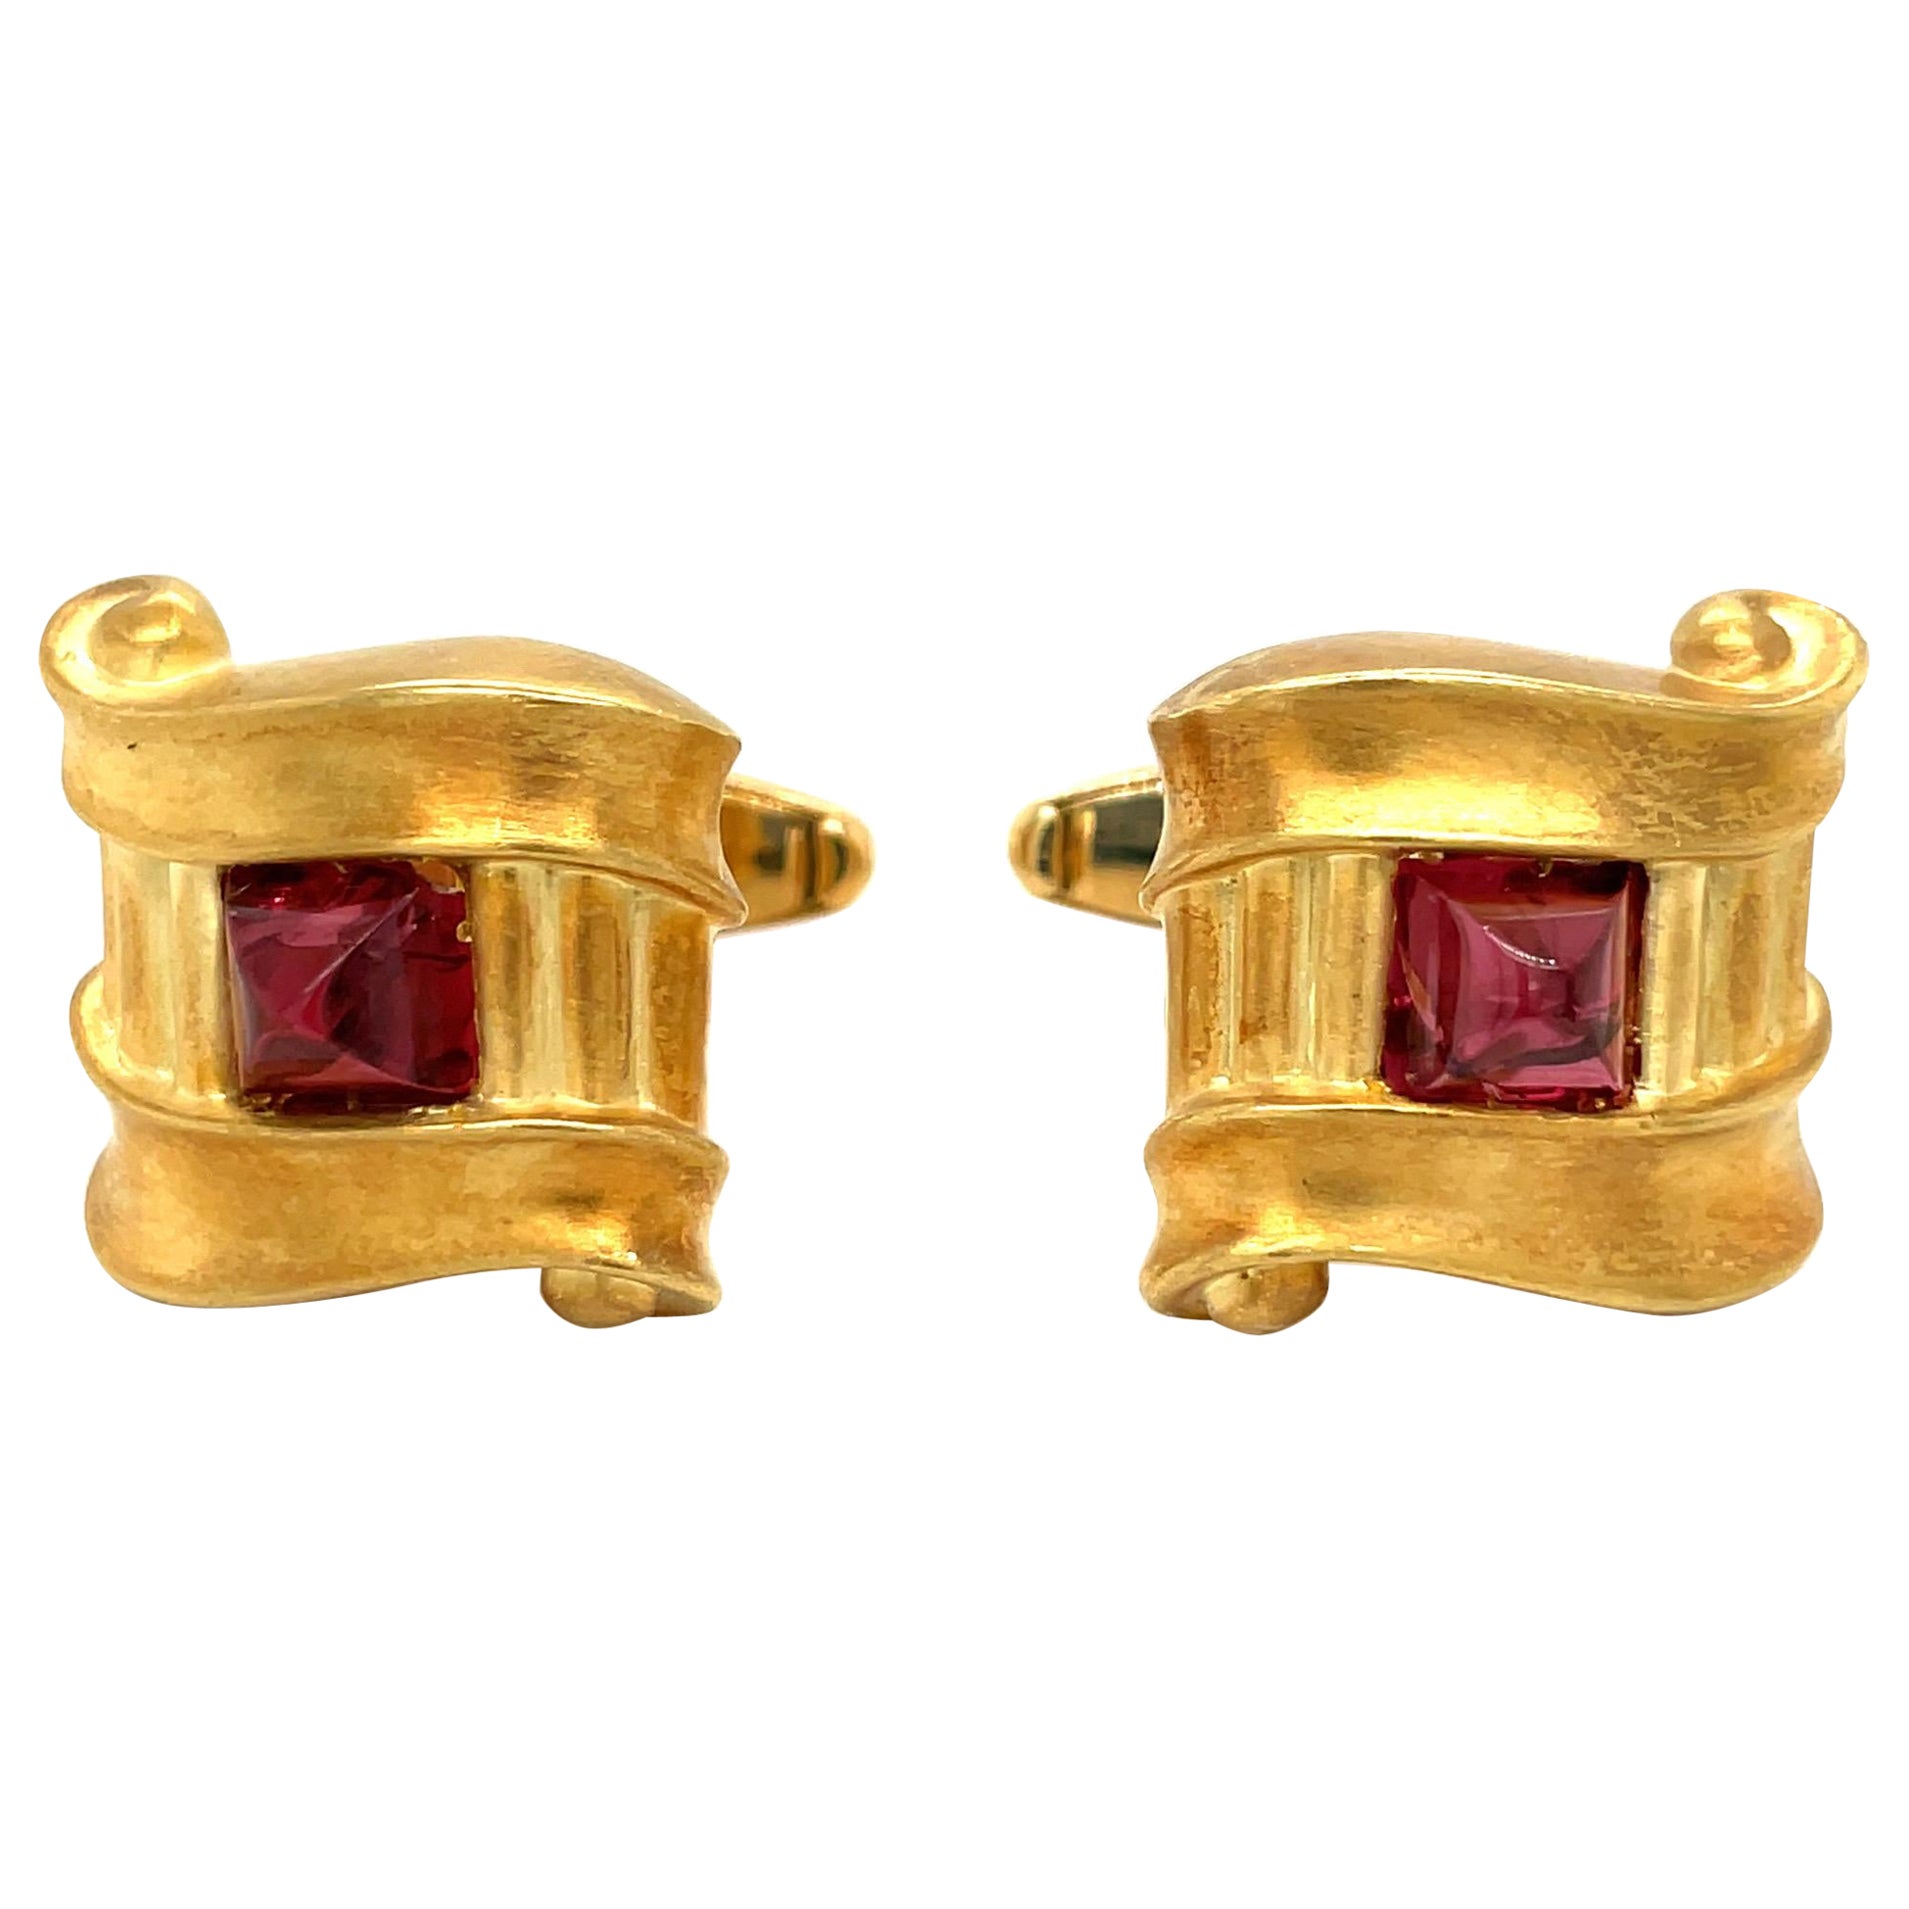 18KT Yellow Gold Cuff Links with Rhodolite Centers